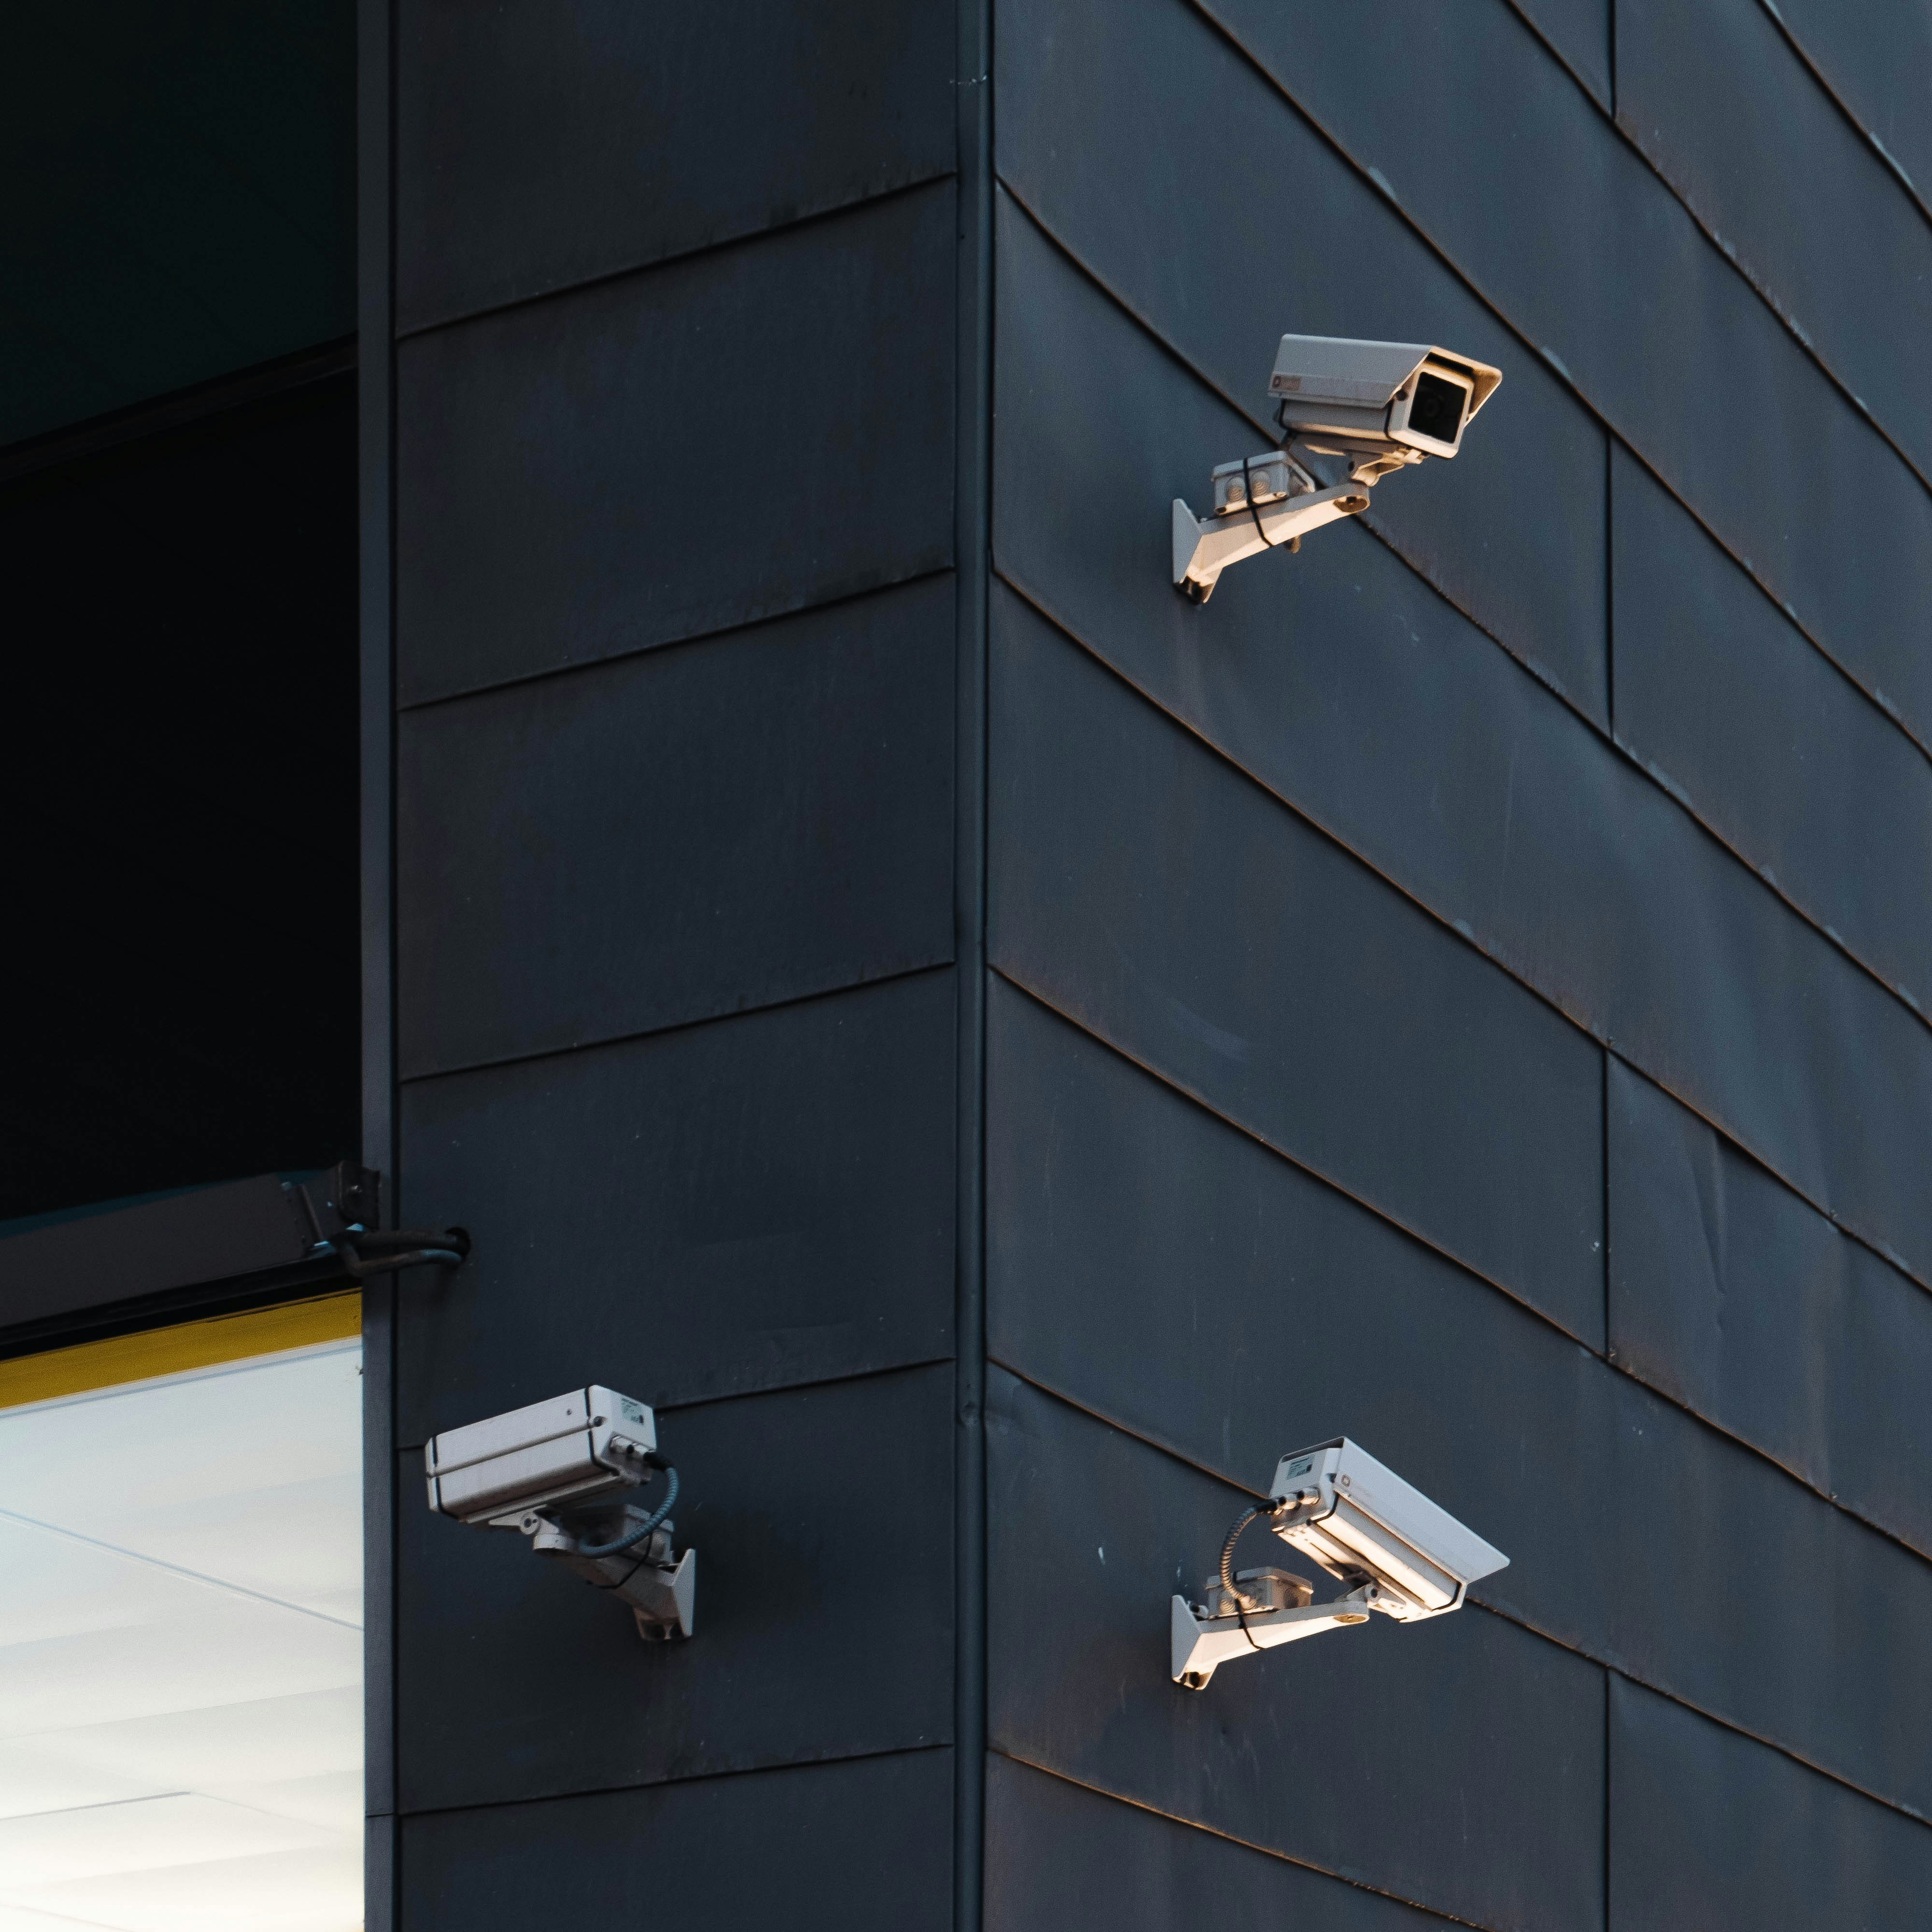 Surveillance cameras spotted at Barcelona’s design museum.